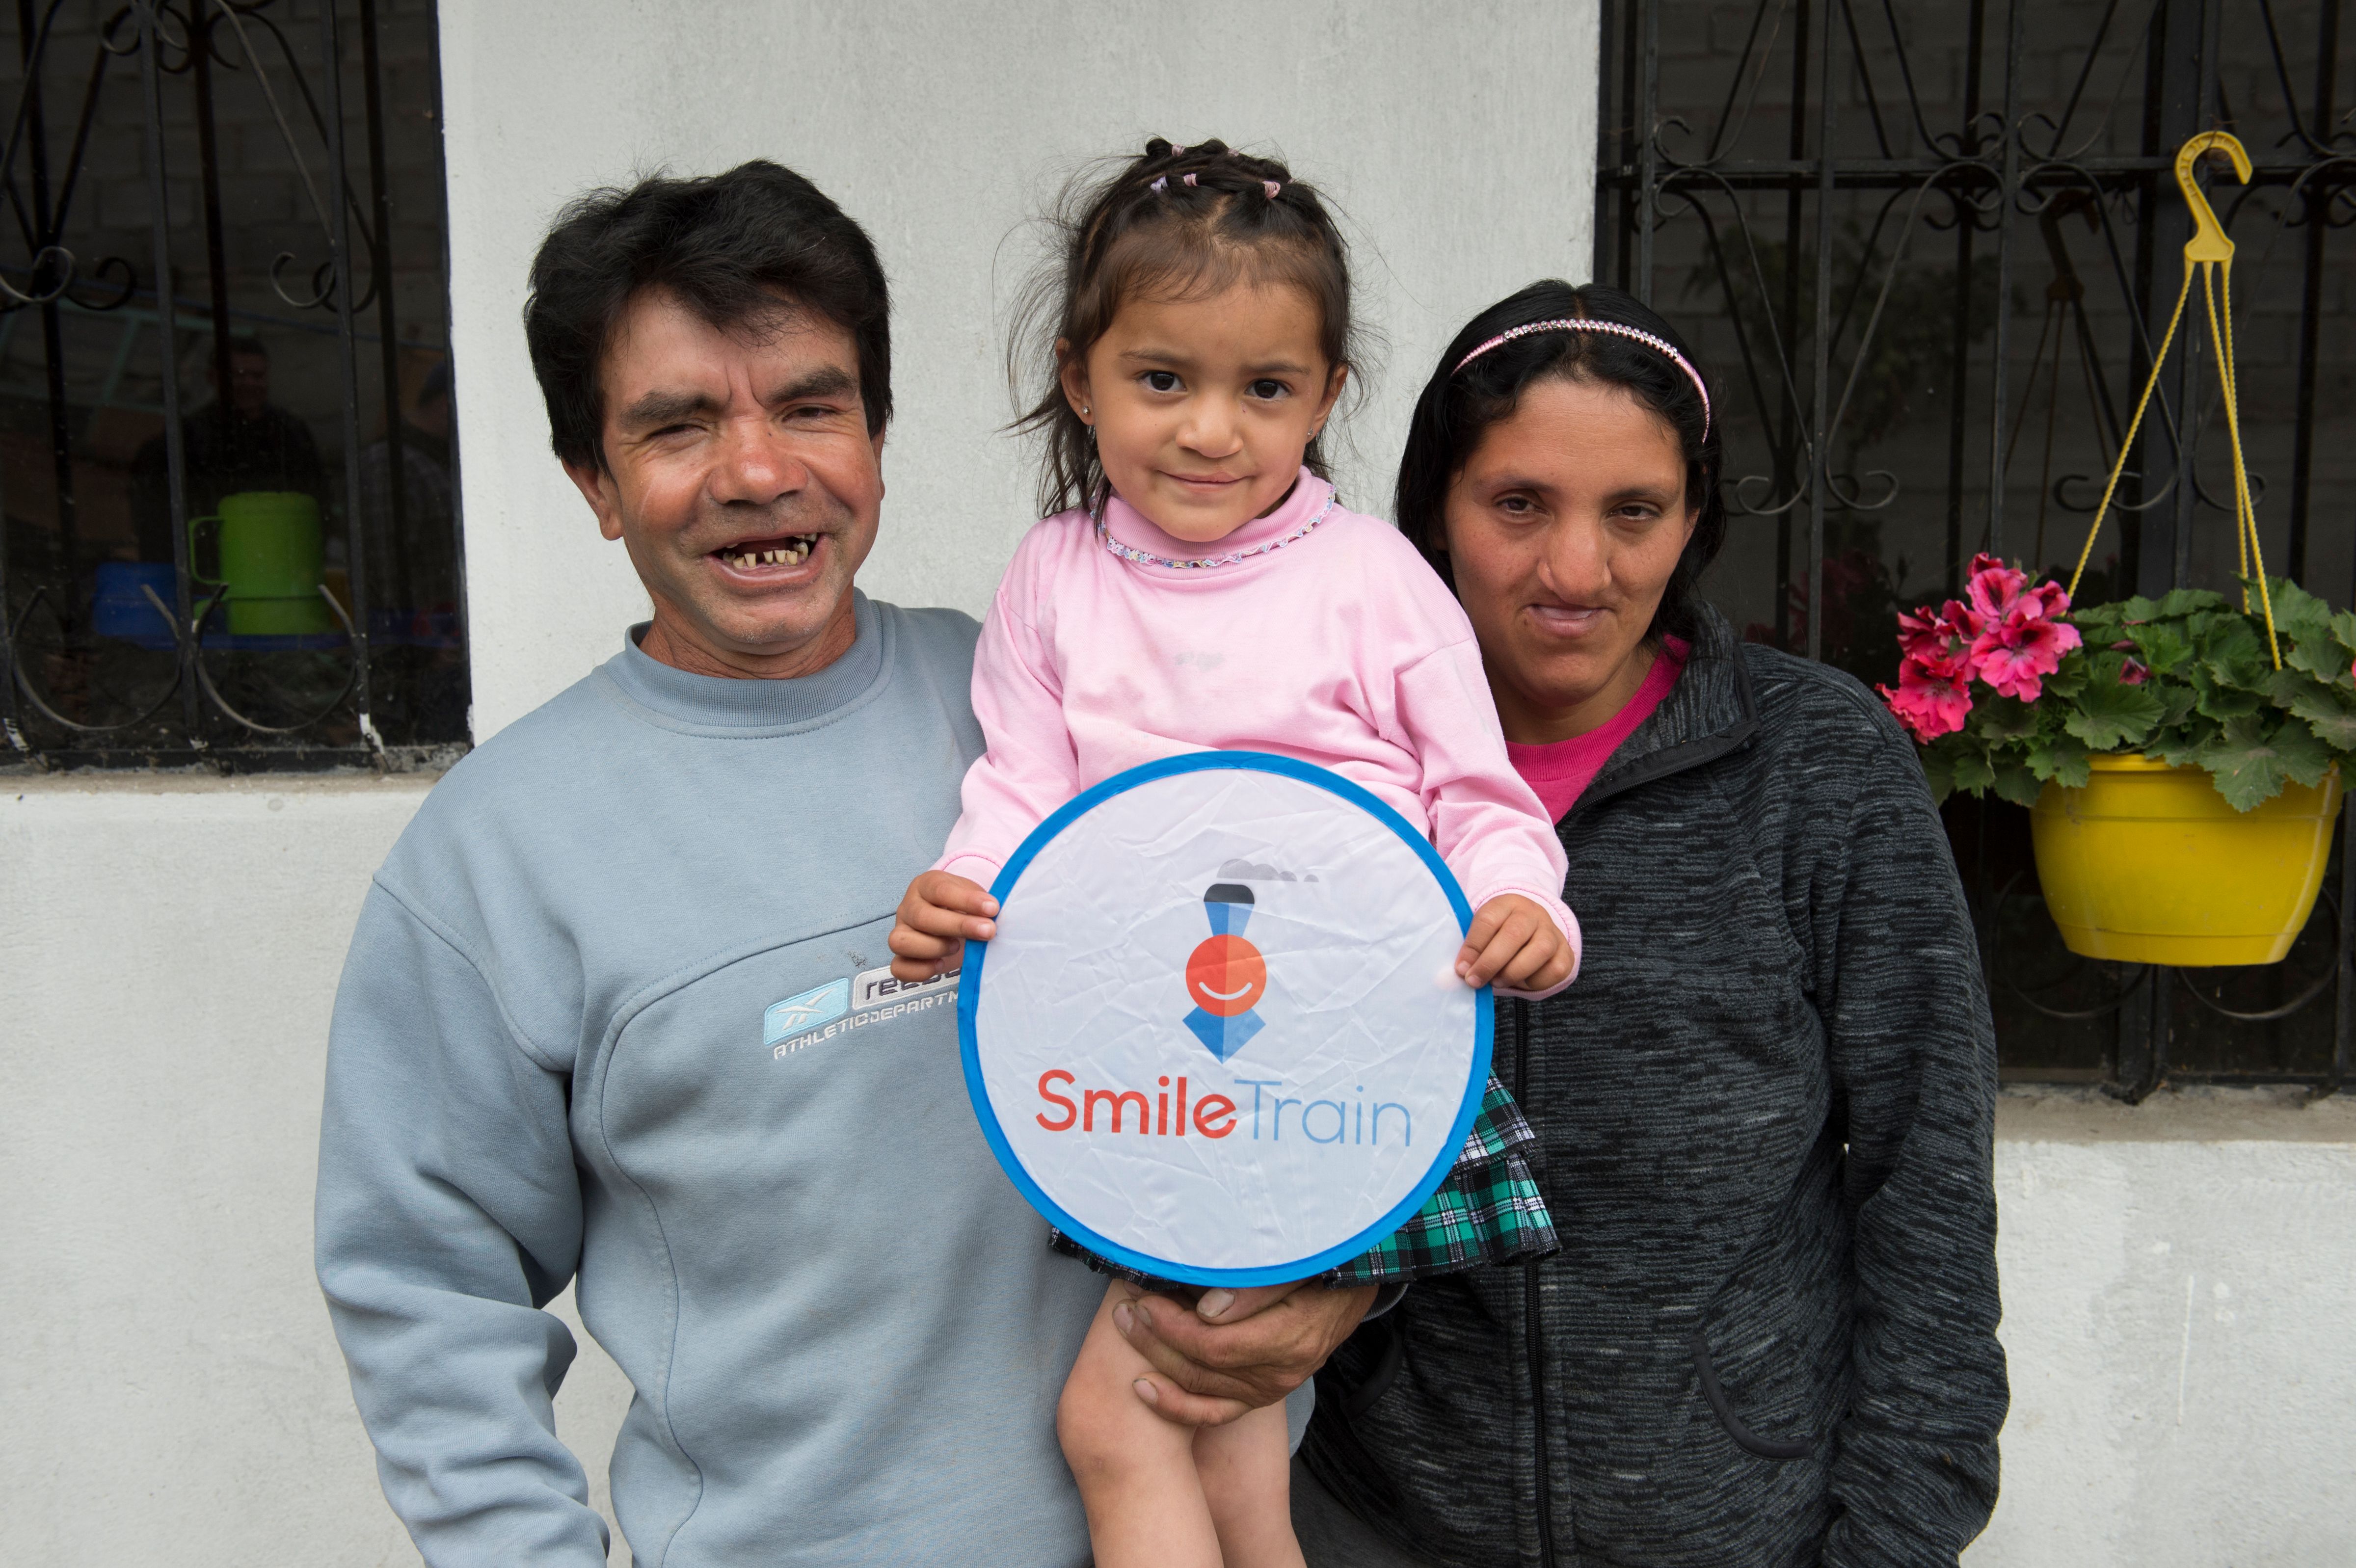 Estefania and her parents holding a Smile Train sign